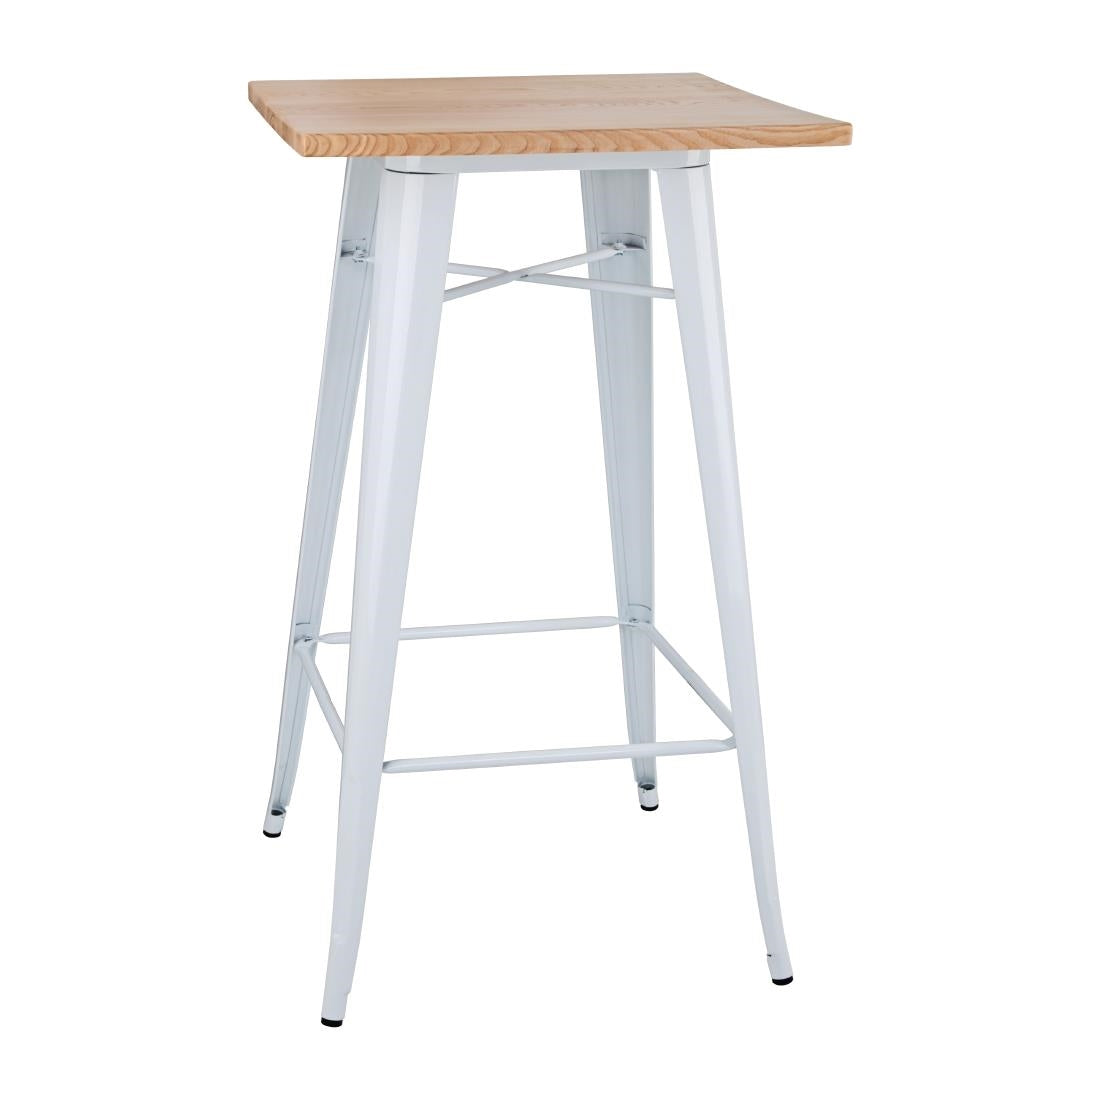 FB597 Bolero Bistro Bar Table with Wooden Top White (Single) JD Catering Equipment Solutions Ltd